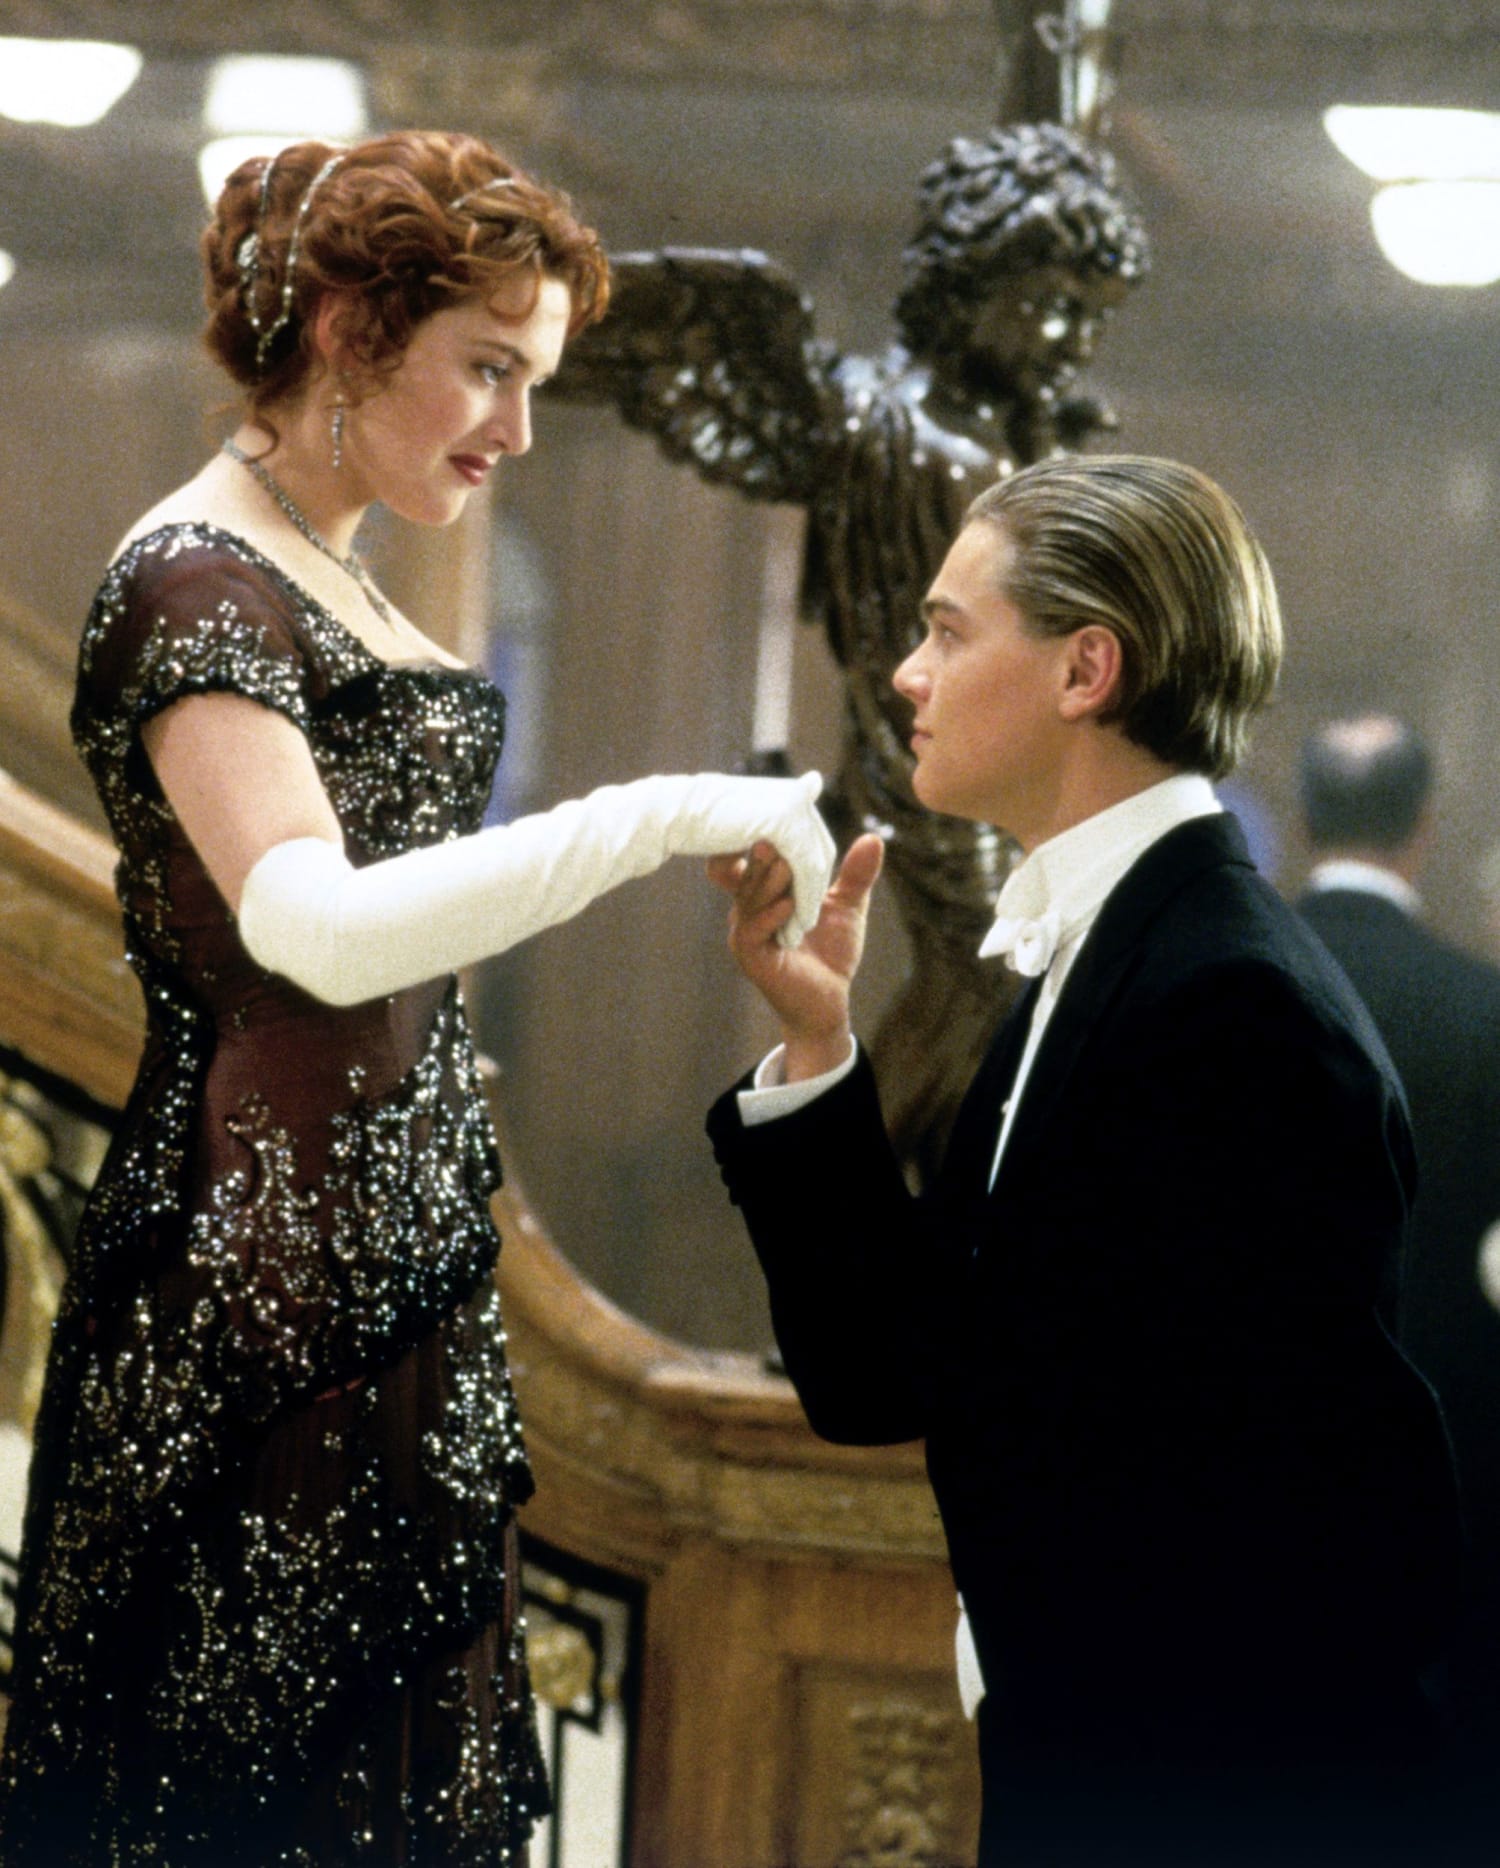 New 'Titanic' Poster Raises Eyebrows Over Kate Winslet's Hair - Parade